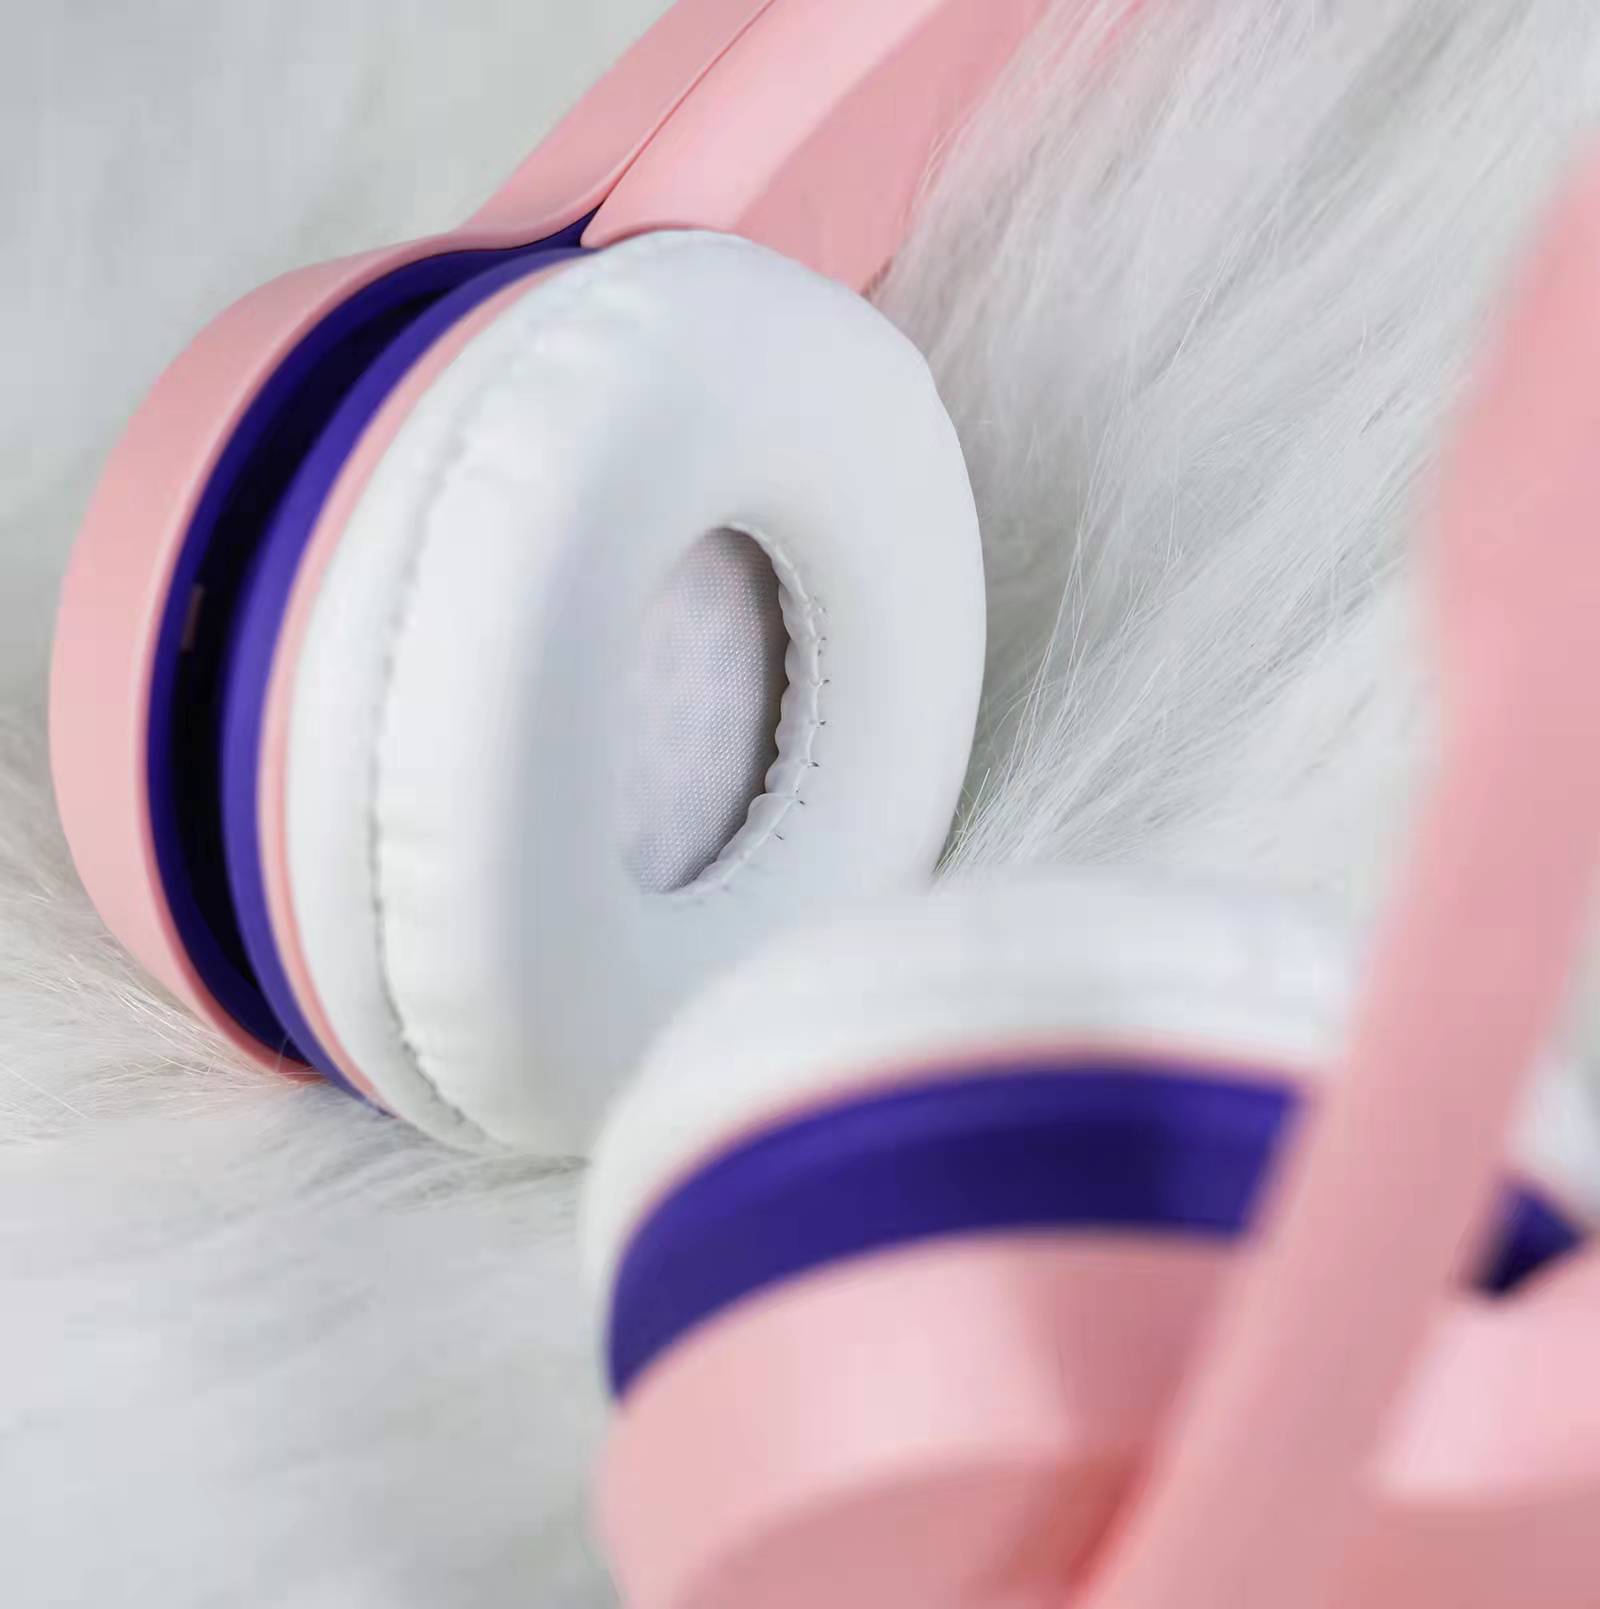 Gaming Headset 3.5mm Headphone Gamer with Cat ear Design